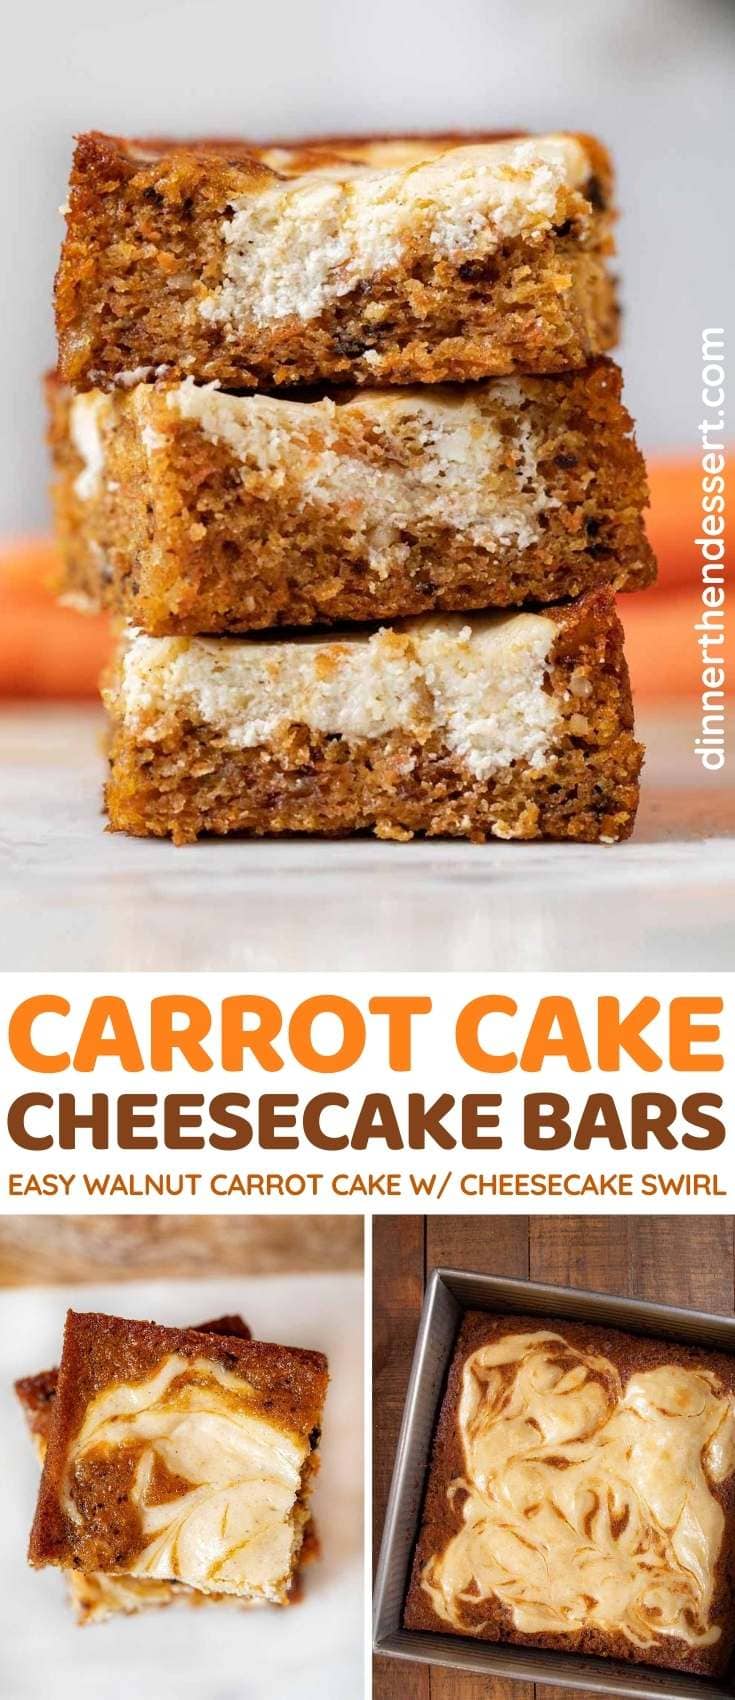 Carrot Cake Cheesecake Bars collage